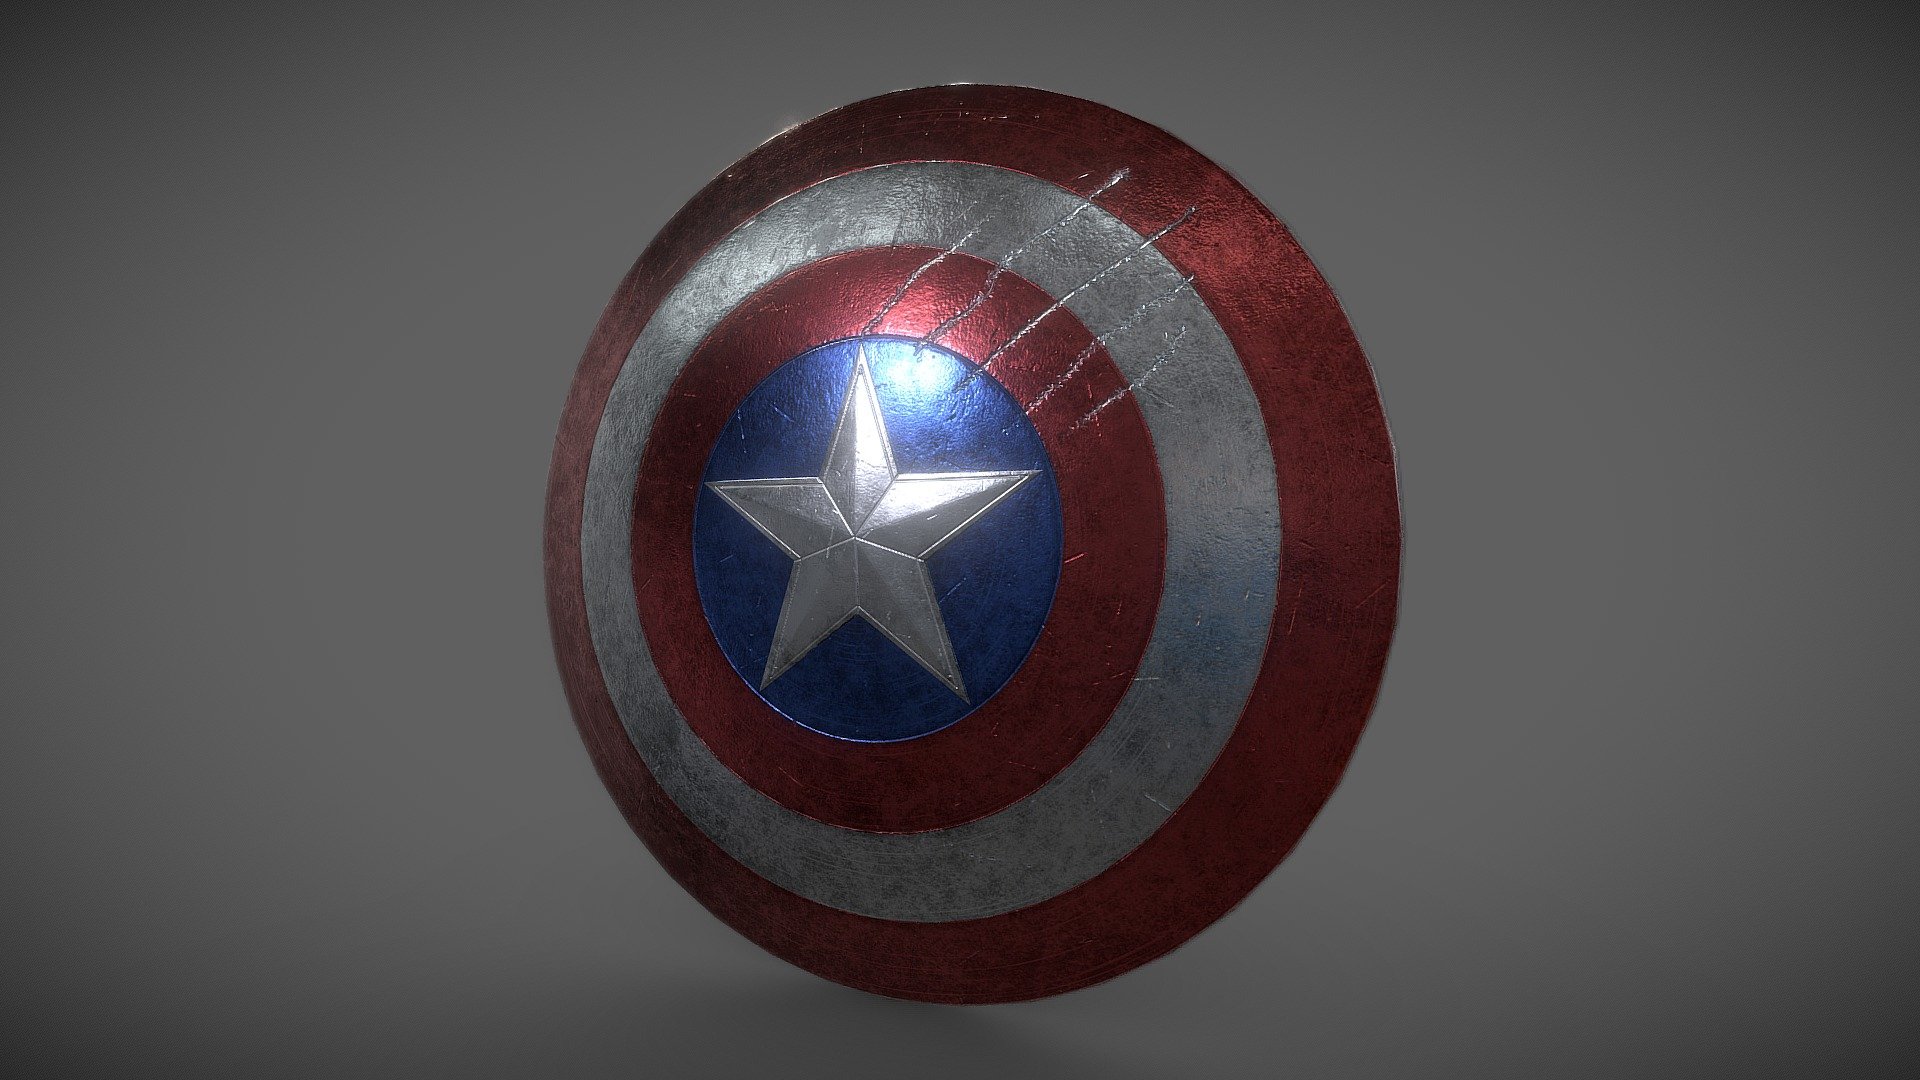 Made Caps Shield after having a rough fight with Black Panther (Captain America Civil War)
Made within 5 hours - Captain America Shield - Download Free 3D model by ElliotGriffiths (@ElliotGriffiths24) 3d model